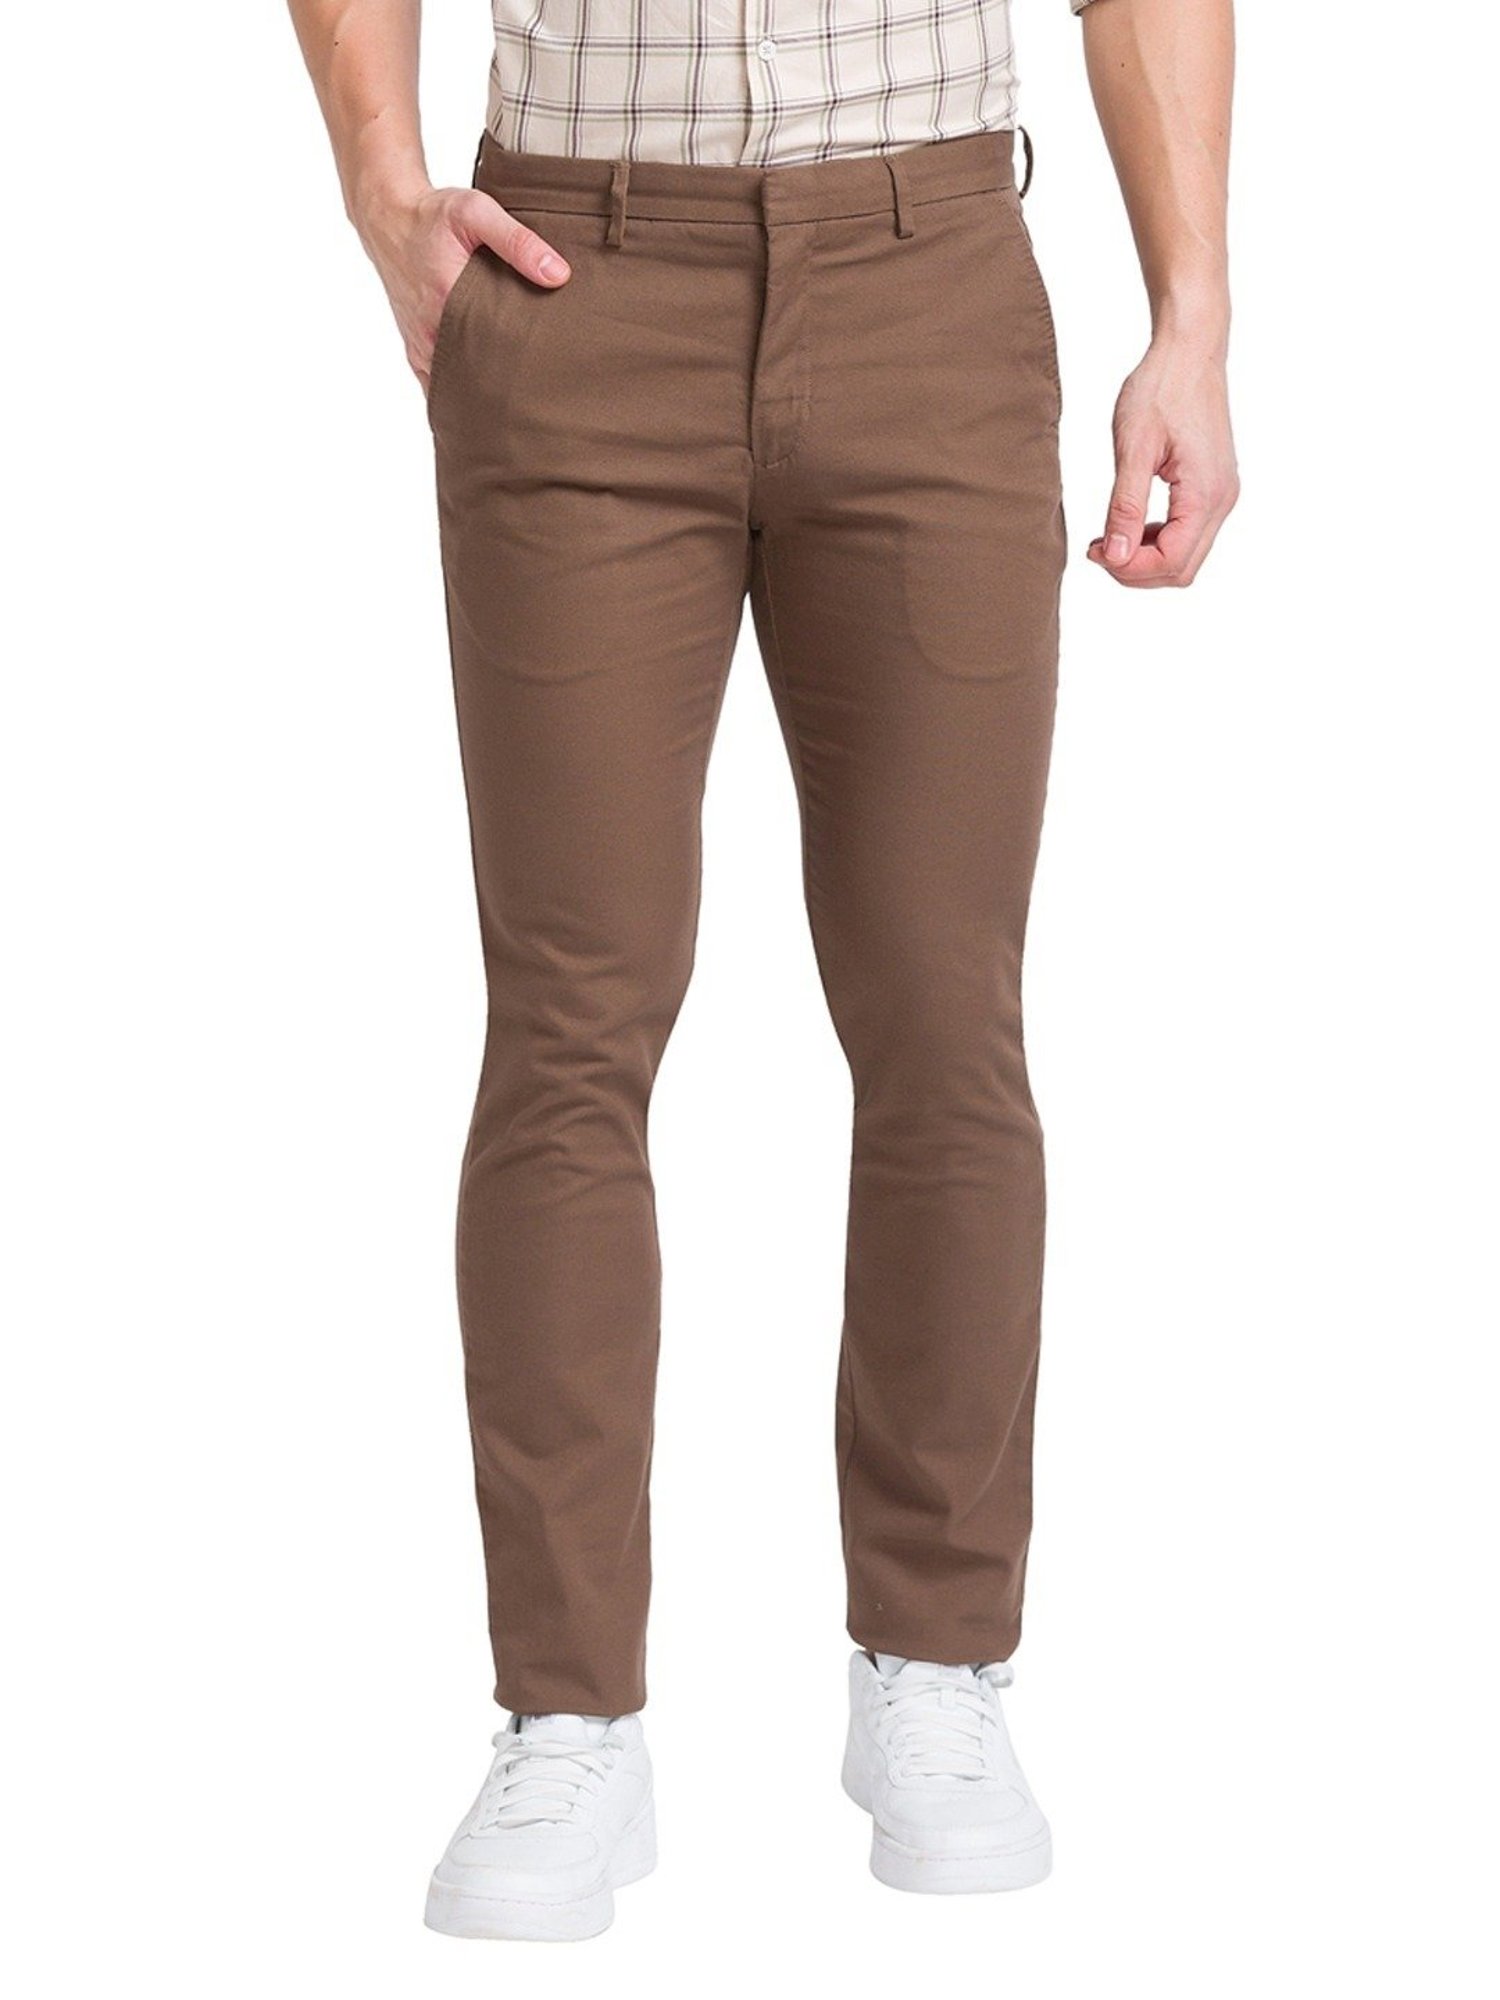 Brown Pants Might Just Be Your New Best Friend - Brown Pant Outfits for Men